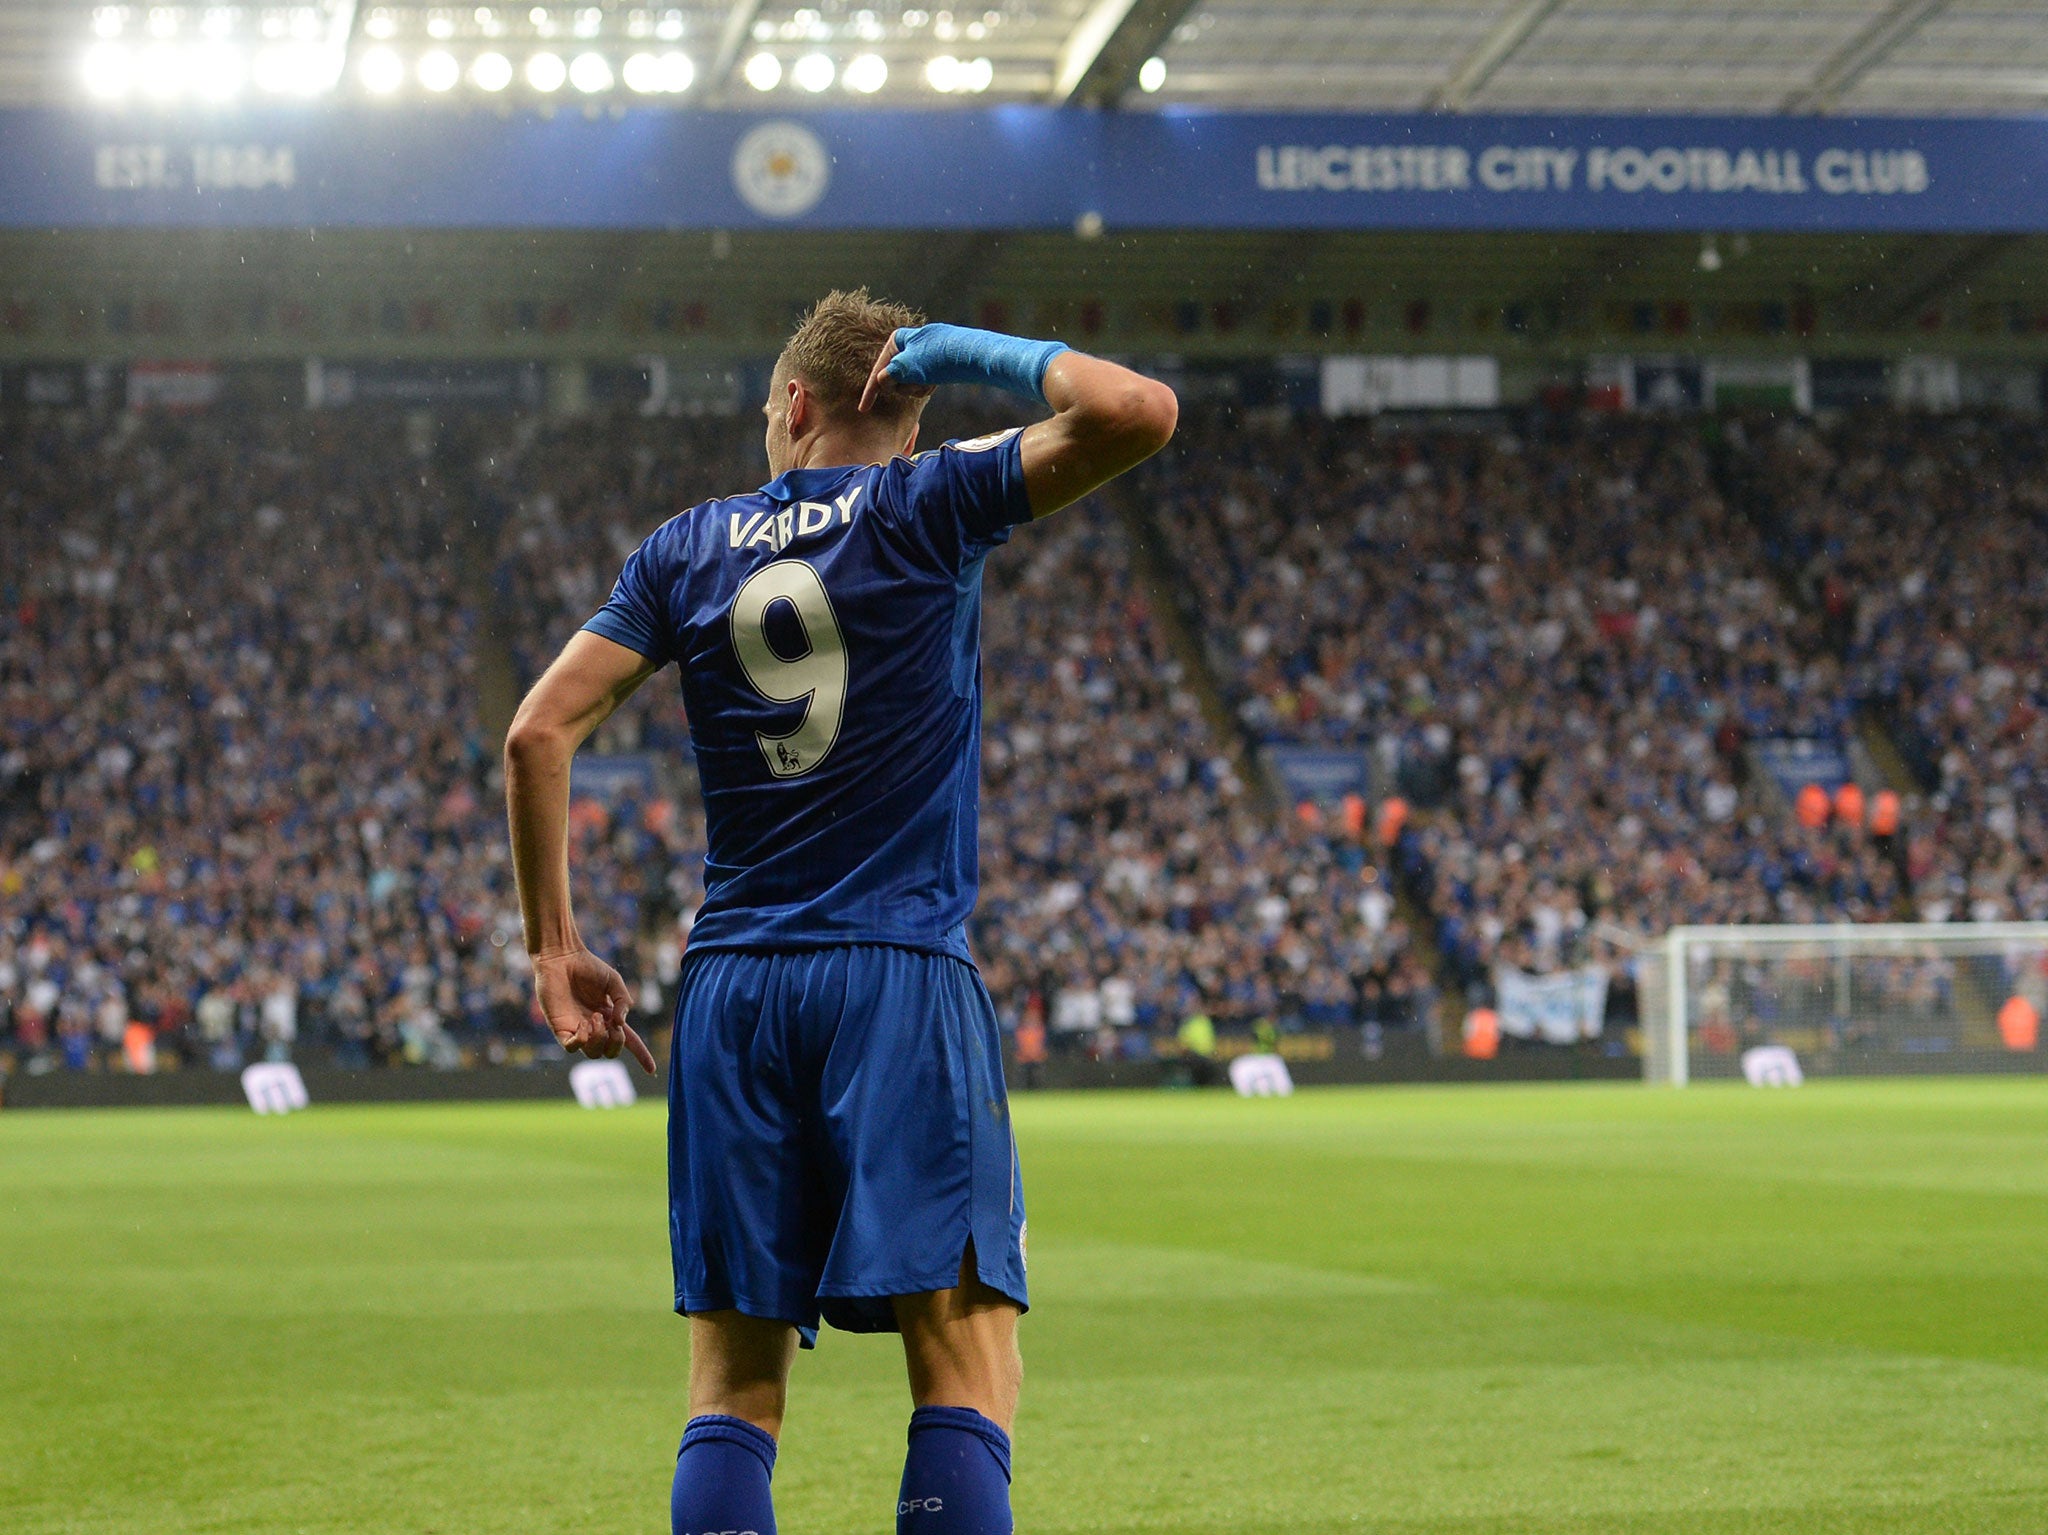 Jamie Vardy got off the mark with his first goal of the new season